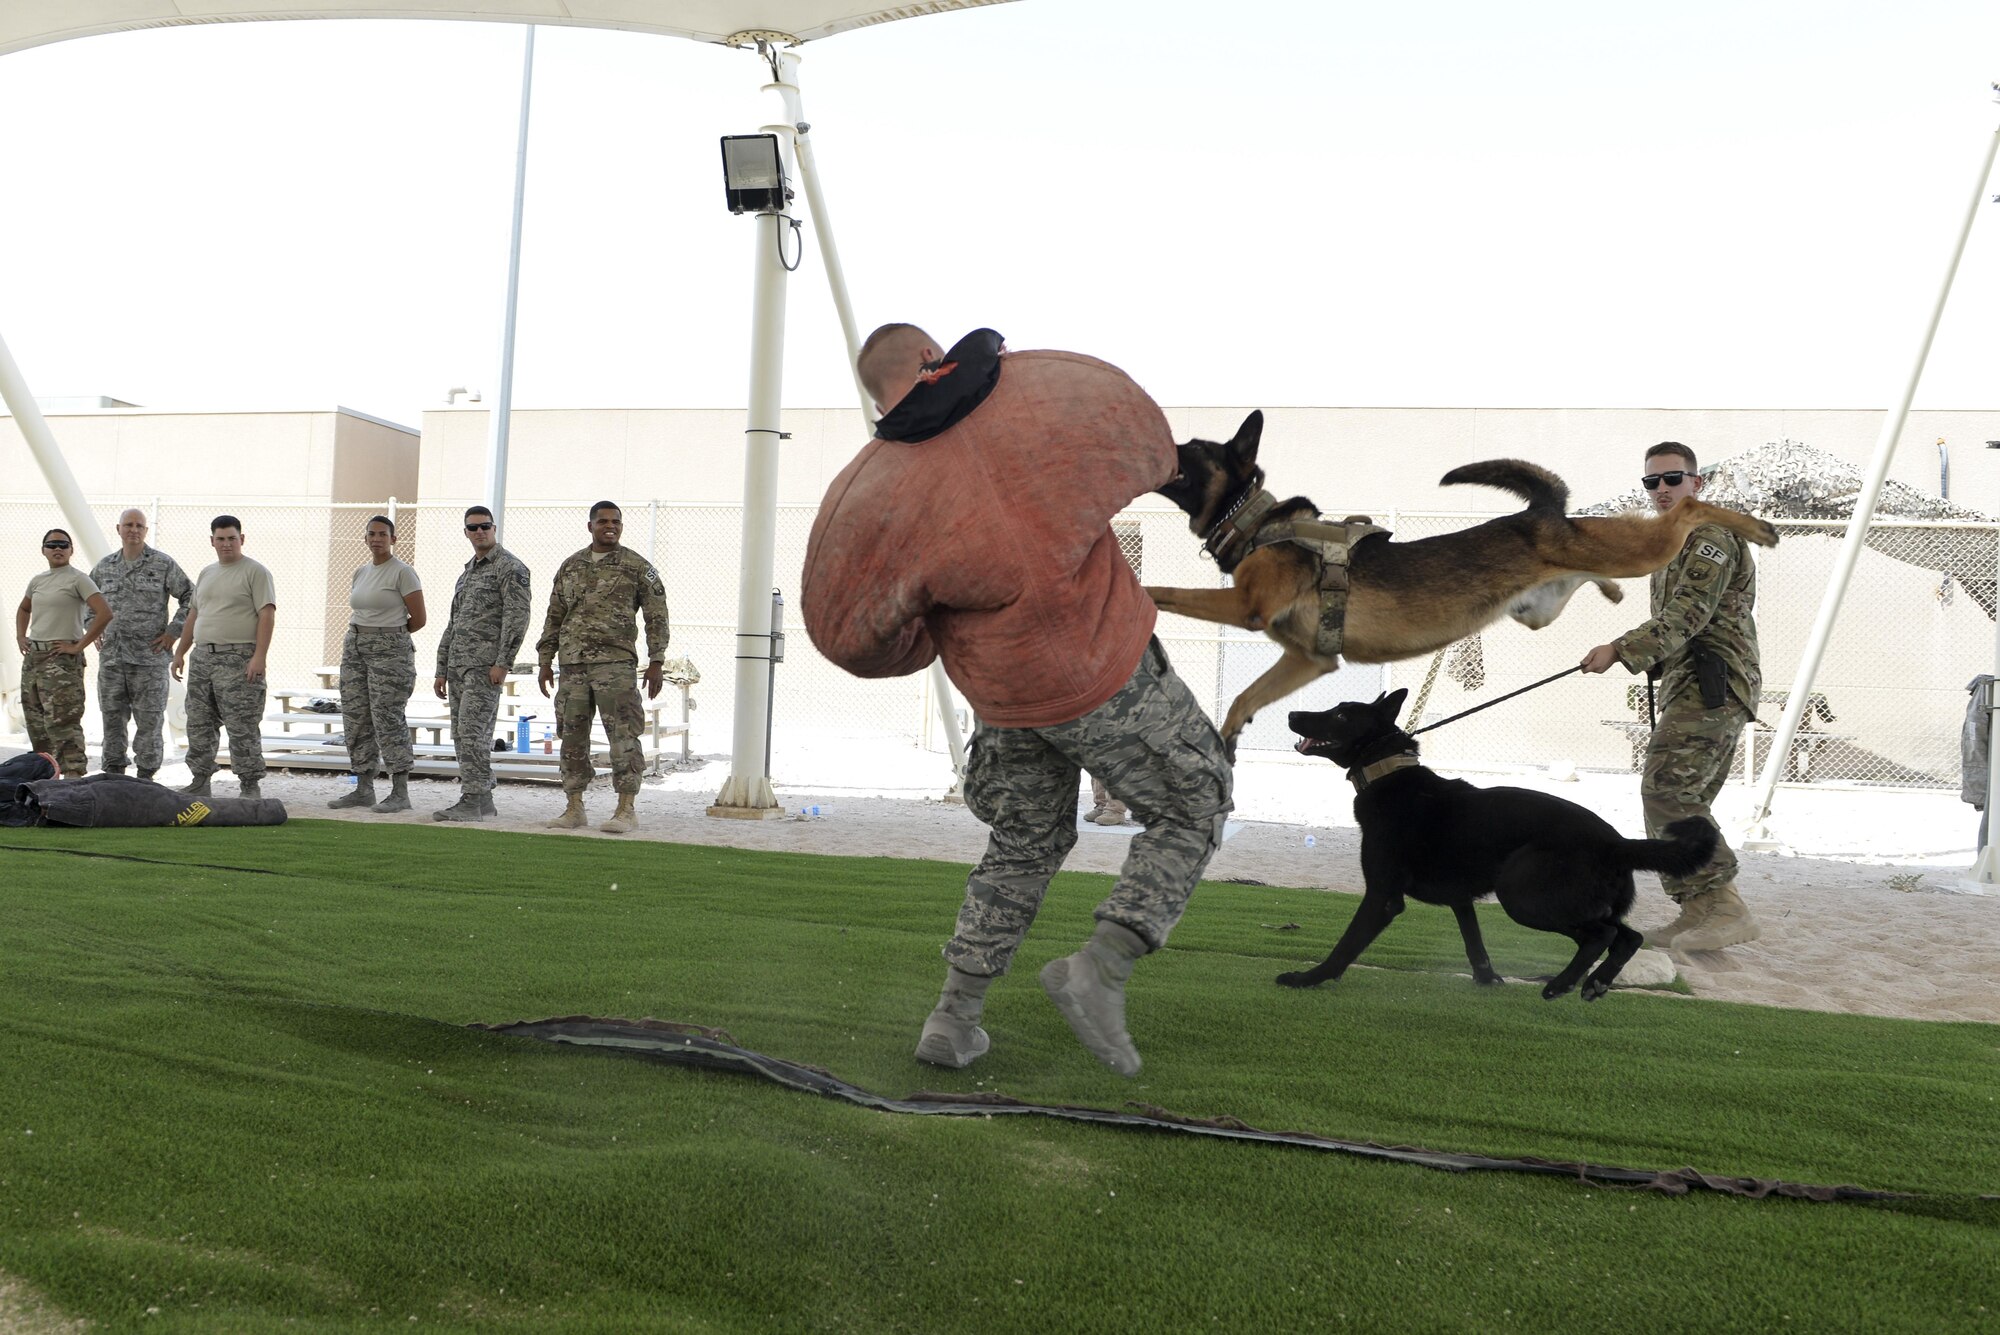 U.S. Air Force Senior Airman Louis Hurbis, military working dog handler assigned to the 379th Expeditionary Security Forces Squadron, spins as military working dog, Hugo, hangs on tight during a K-9 demonstration exercise at Al Udeid Air Base, Qatar, Aug. 17, 2017.